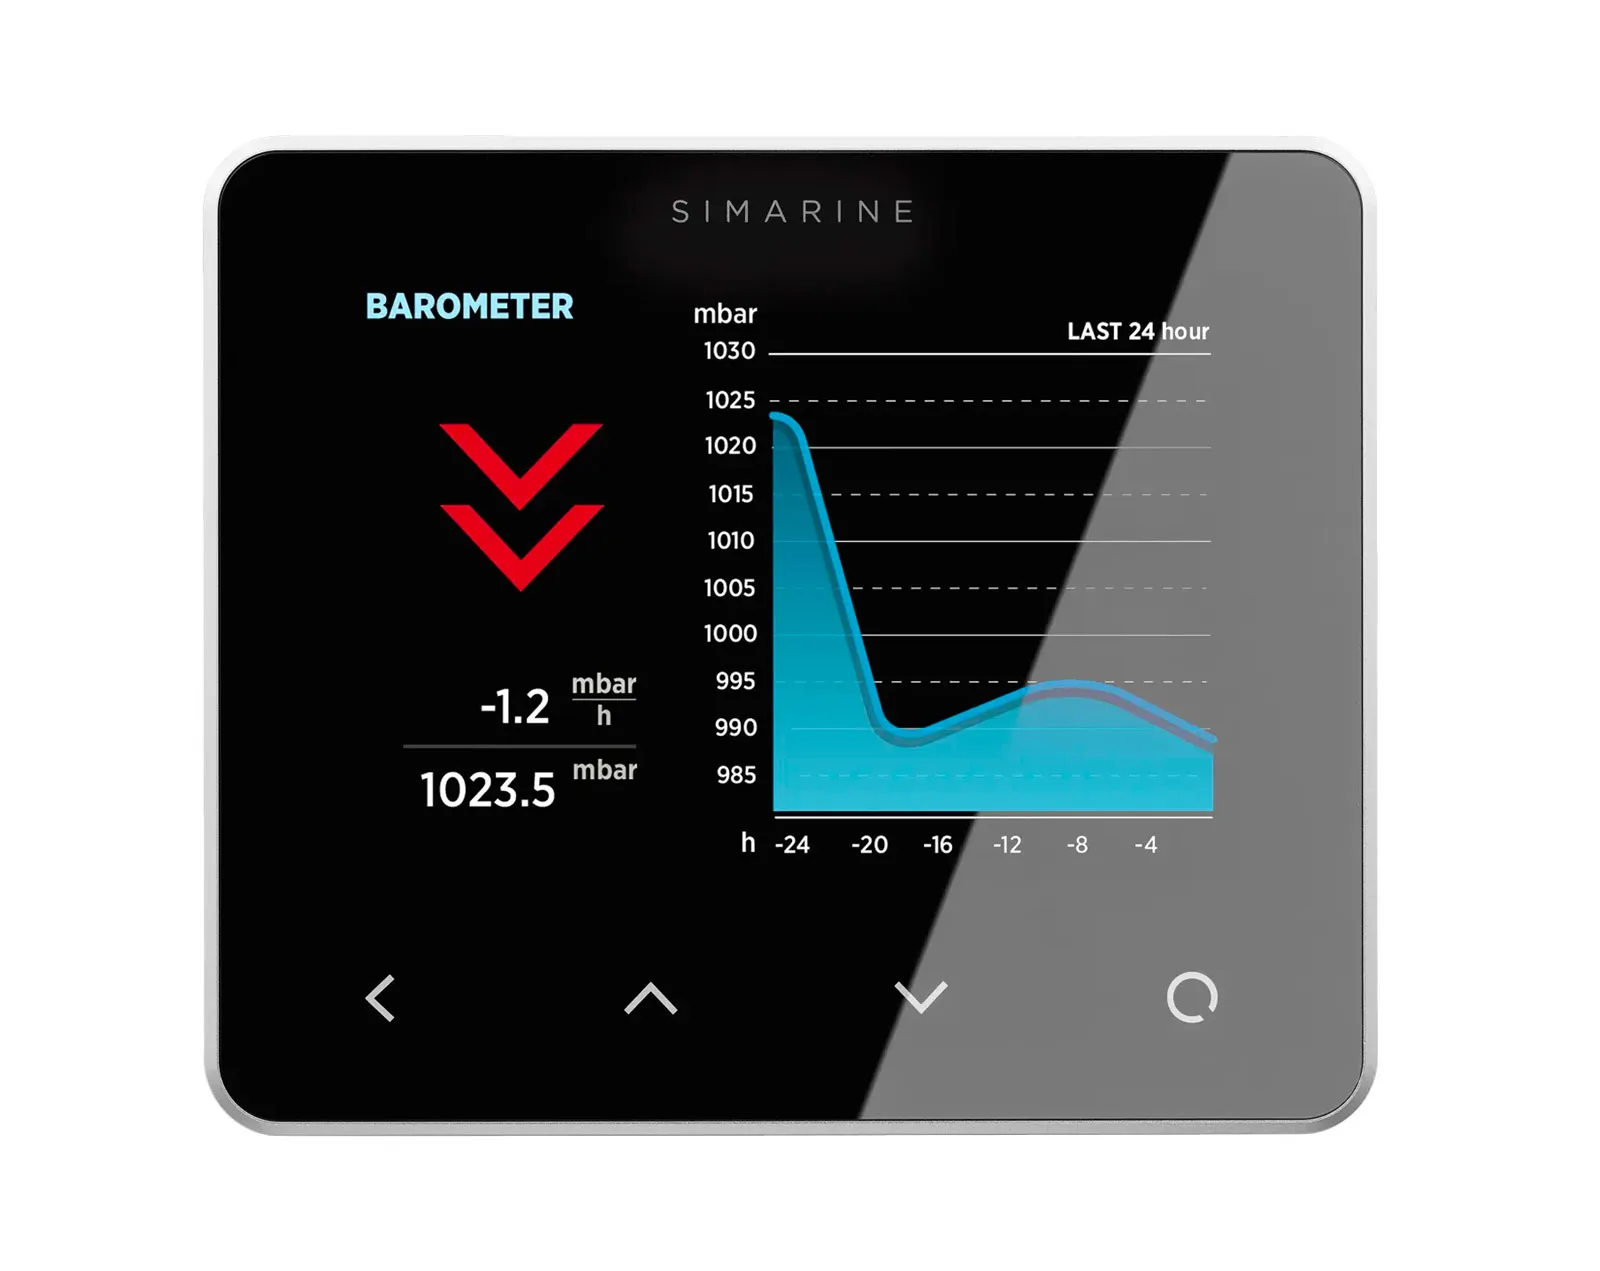 Battery monitor PICO for boats, campervans, RVs - Simarine